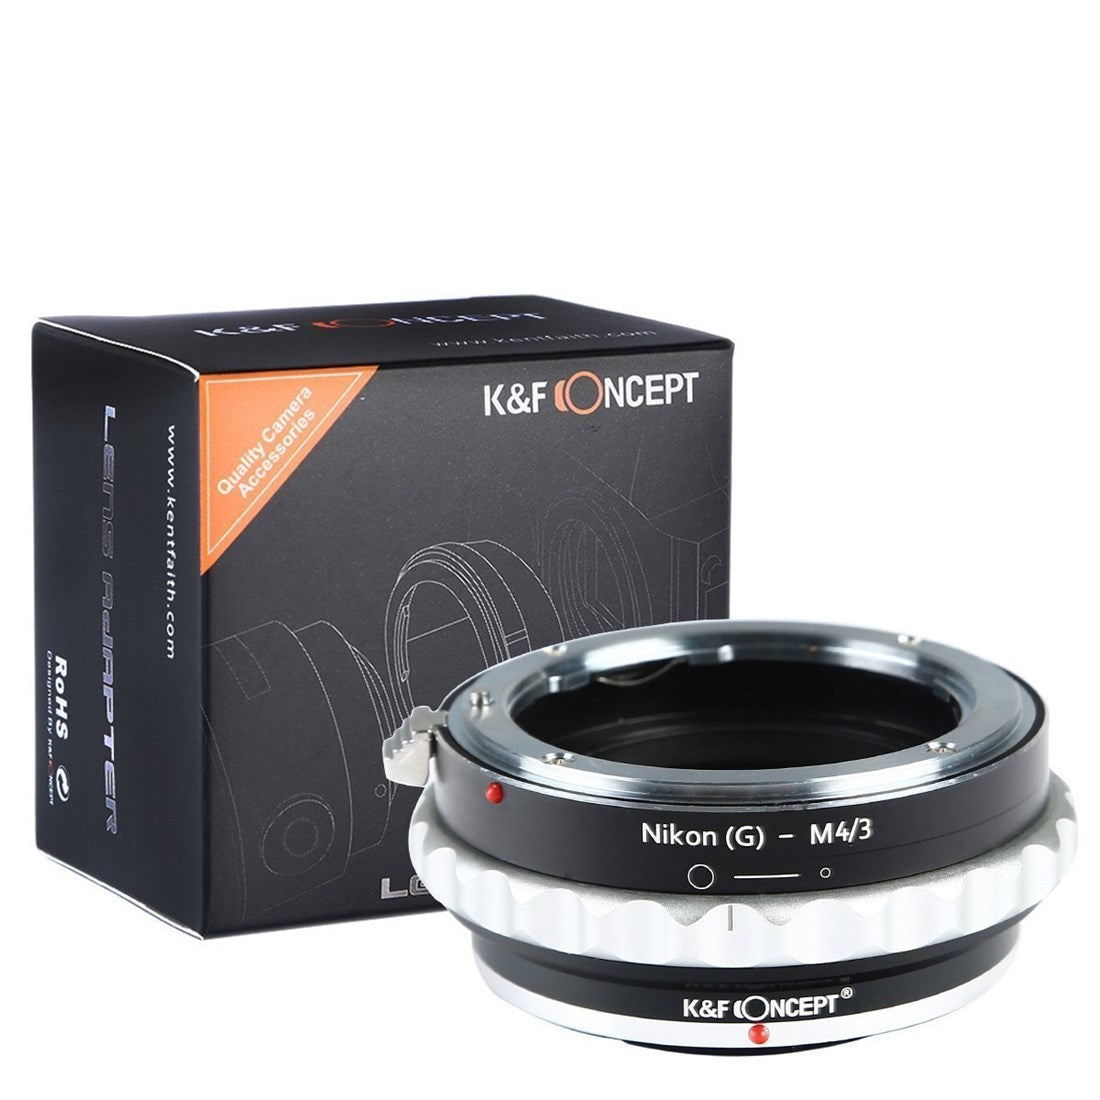 Product Image of K&F Concept Lens Adaptor Nikon to Micro Four Thirds MFT with Aperture Control Ring for Nikon G F AI AIS D AF-S KF06.077